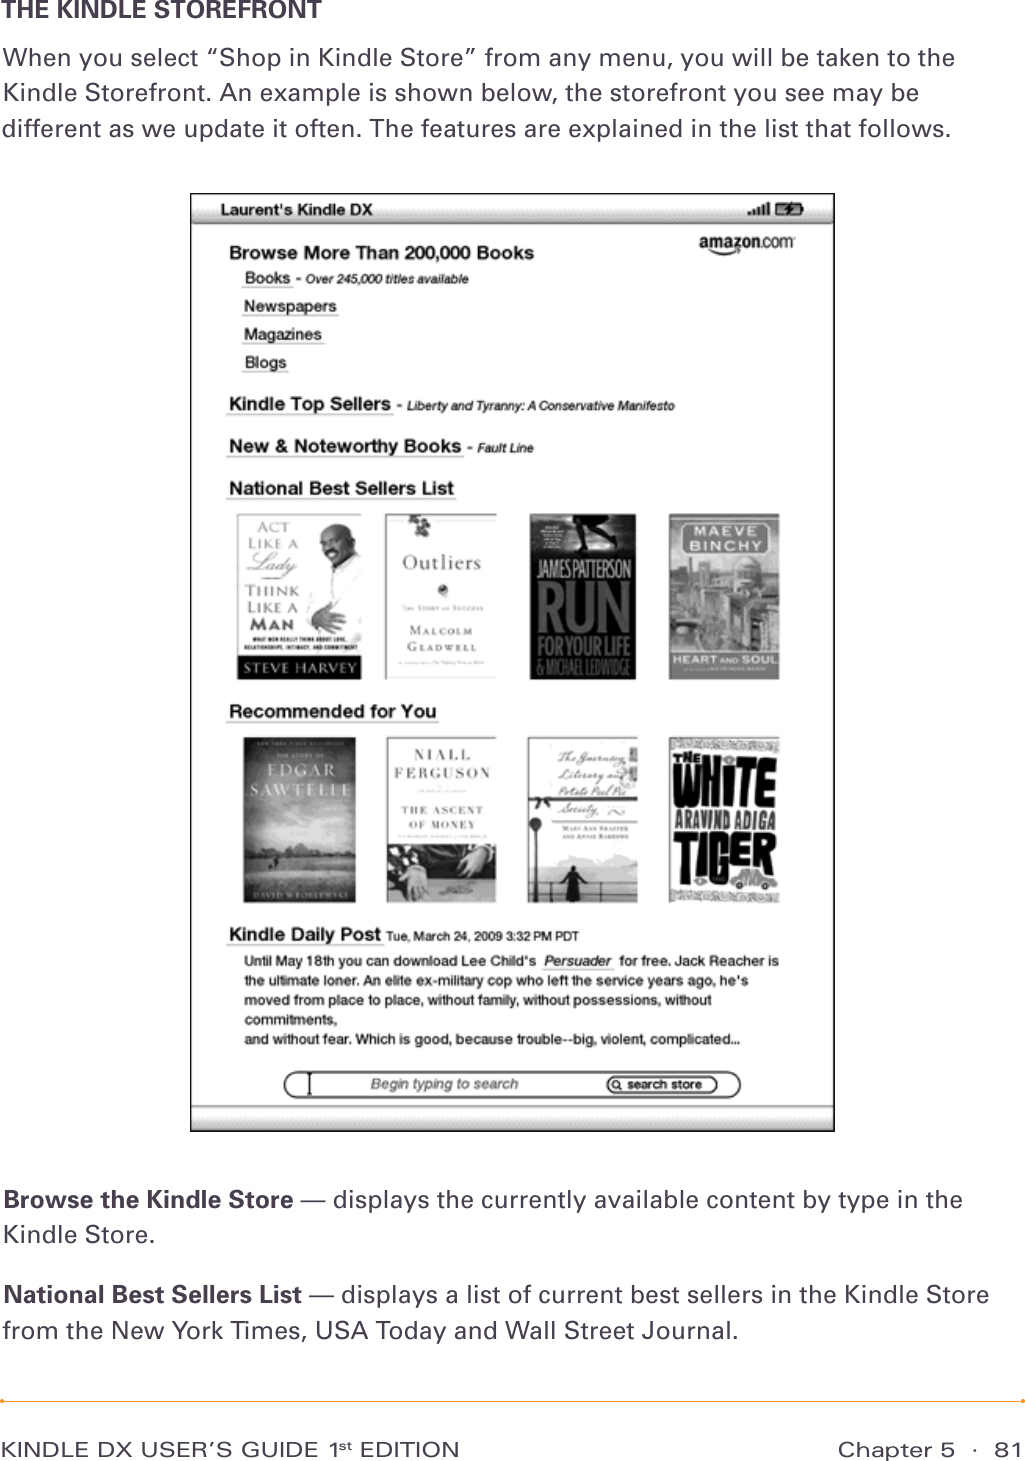 Chapter 5  ·  81KINDLE DX USER’S GUIDE 1st EDITIONTHE KINDLE STOREFRONTWhen you select “Shop in Kindle Store” from any menu, you will be taken to the Kindle Storefront. An example is shown below, the storefront you see may be different as we update it often. The features are explained in the list that follows.Browse the Kindle Store — displays the currently available content by type in the Kindle Store.National Best Sellers List — displays a list of current best sellers in the Kindle Store from the New York Times, USA Today and Wall Street Journal.